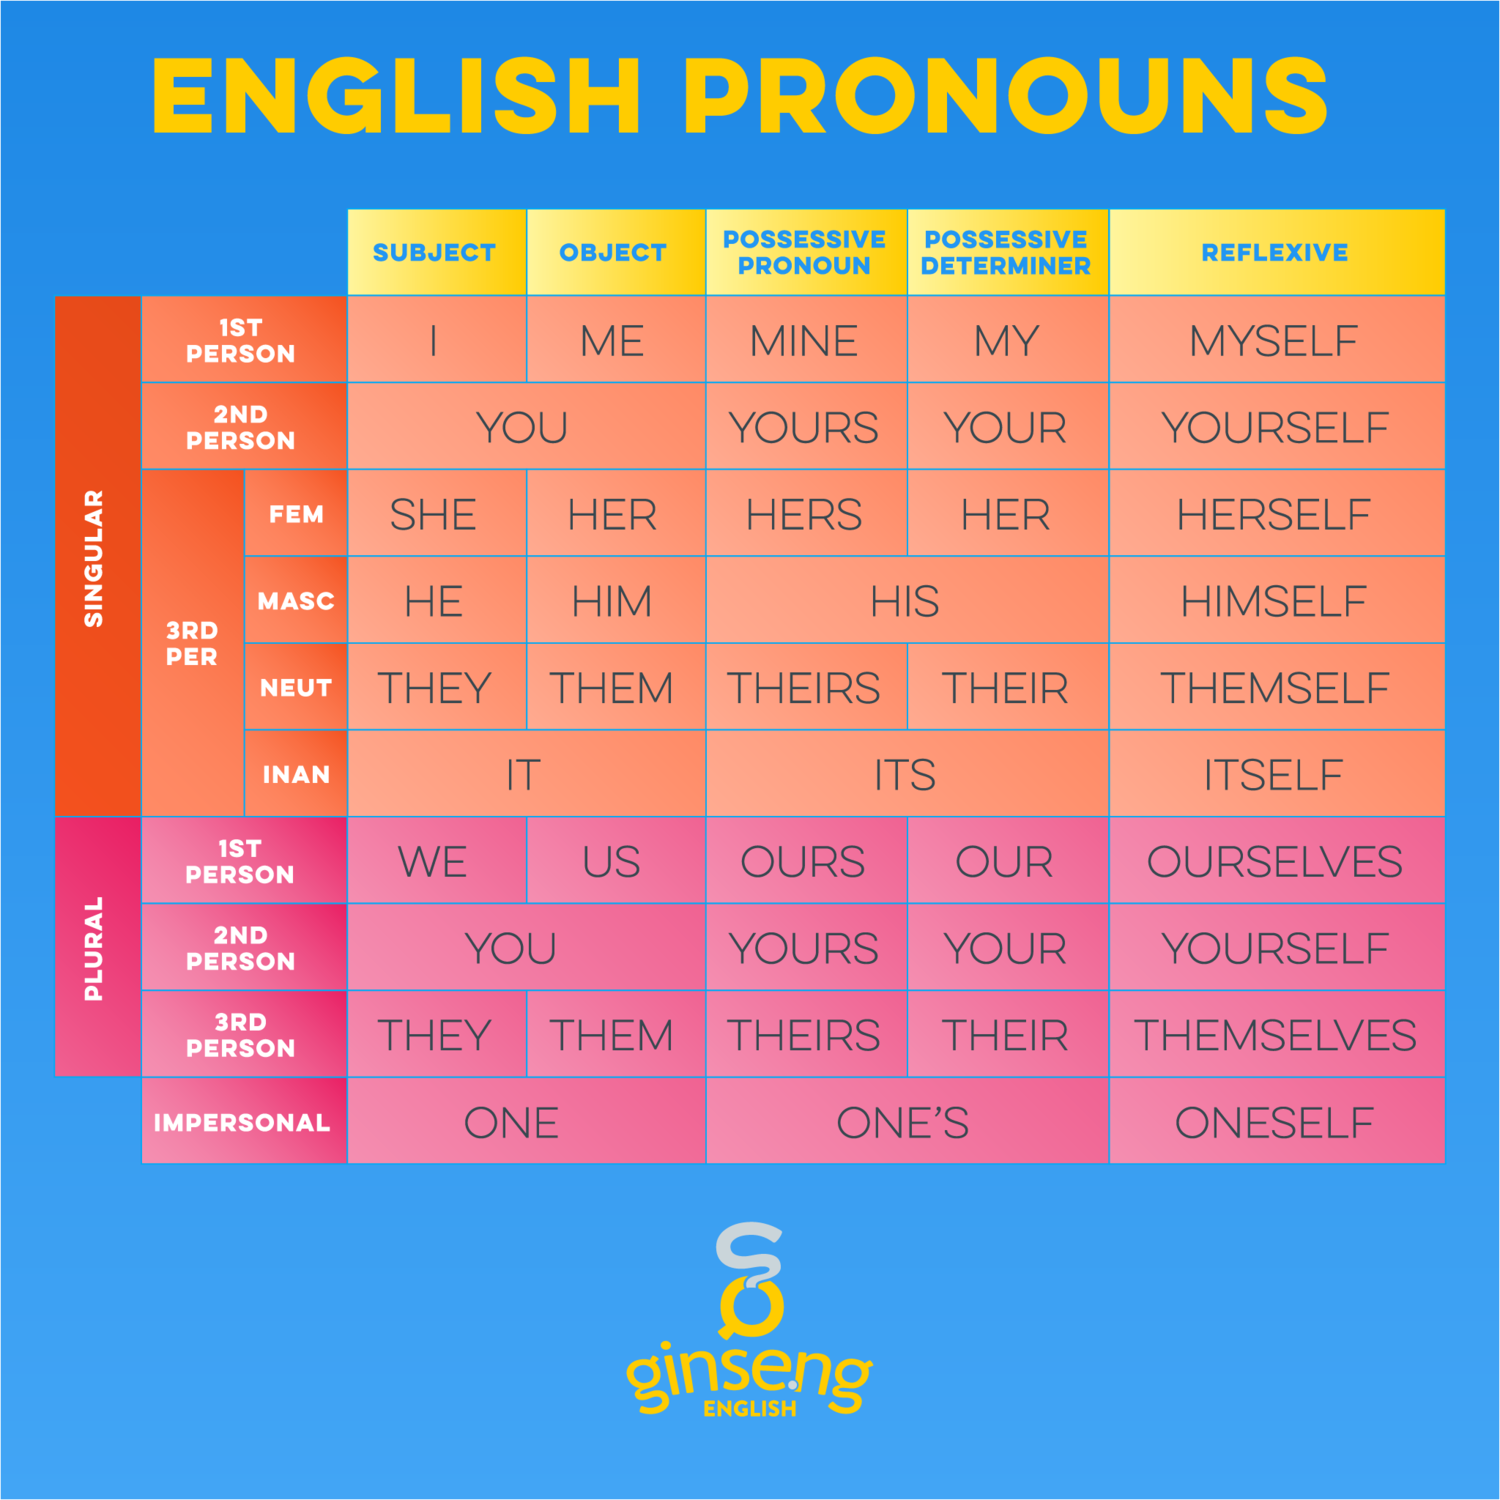 What Pronoun Is Herself